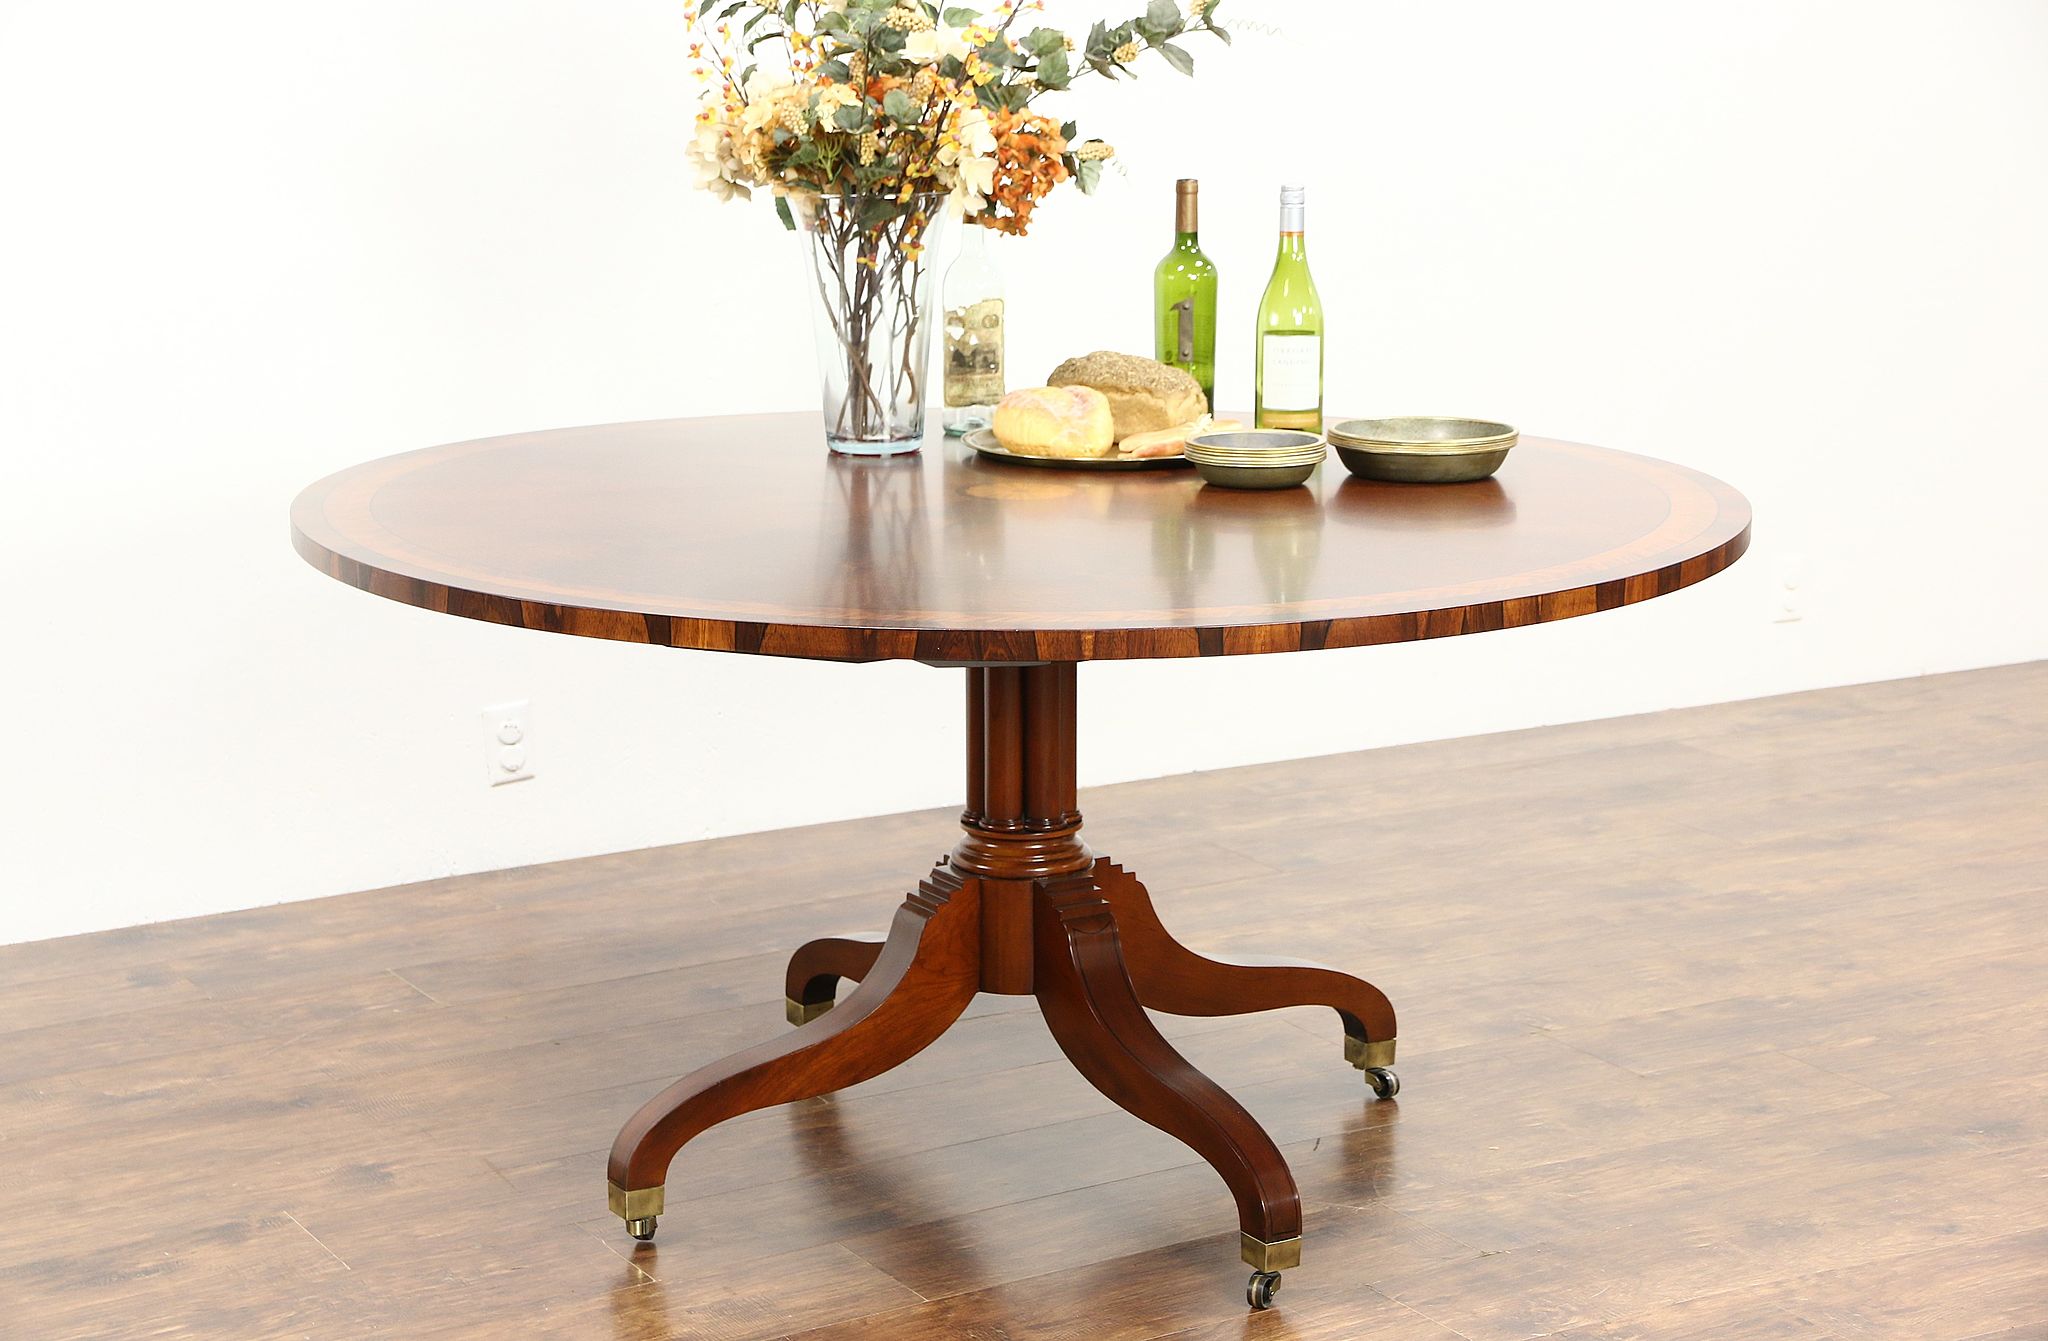 Sold Round Sunburst Banded Vintage 5 Dining Table Mario Buatta For John Widdicomb Harp Gallery Antiques Furniture